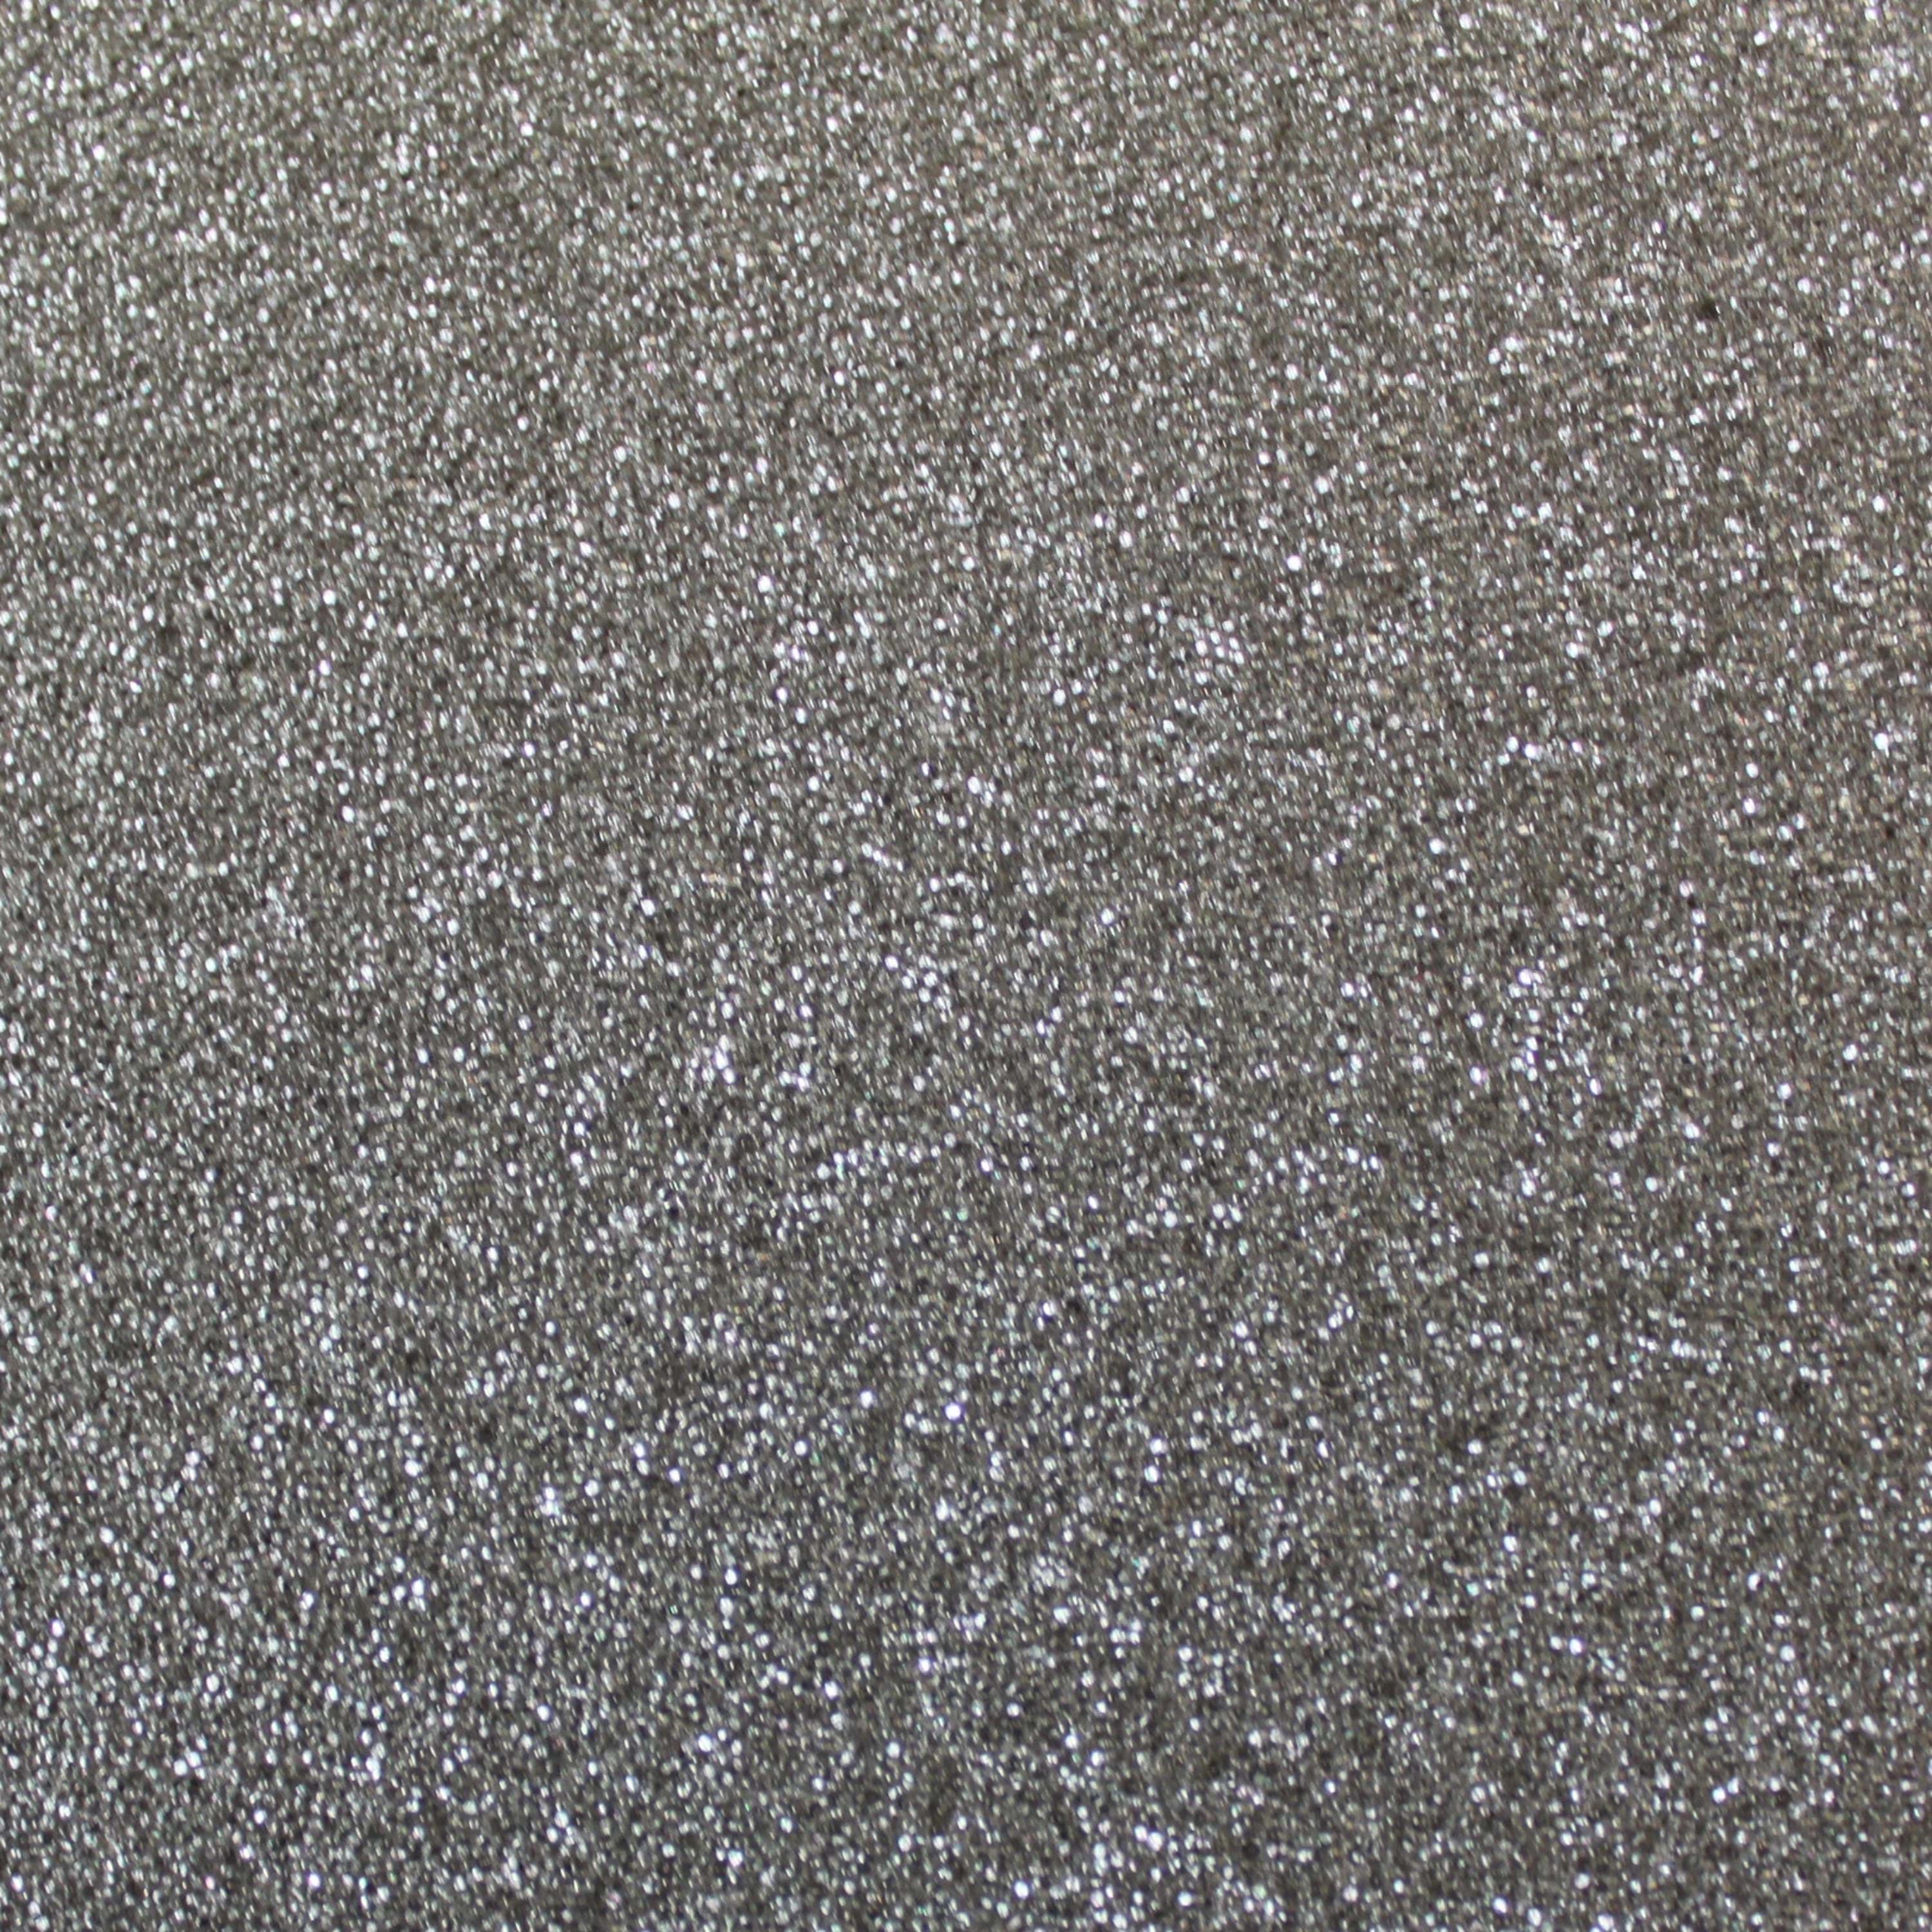 Noise Absorbing Foam Material, Sold Per Running Foot **CALL TO ORDER**